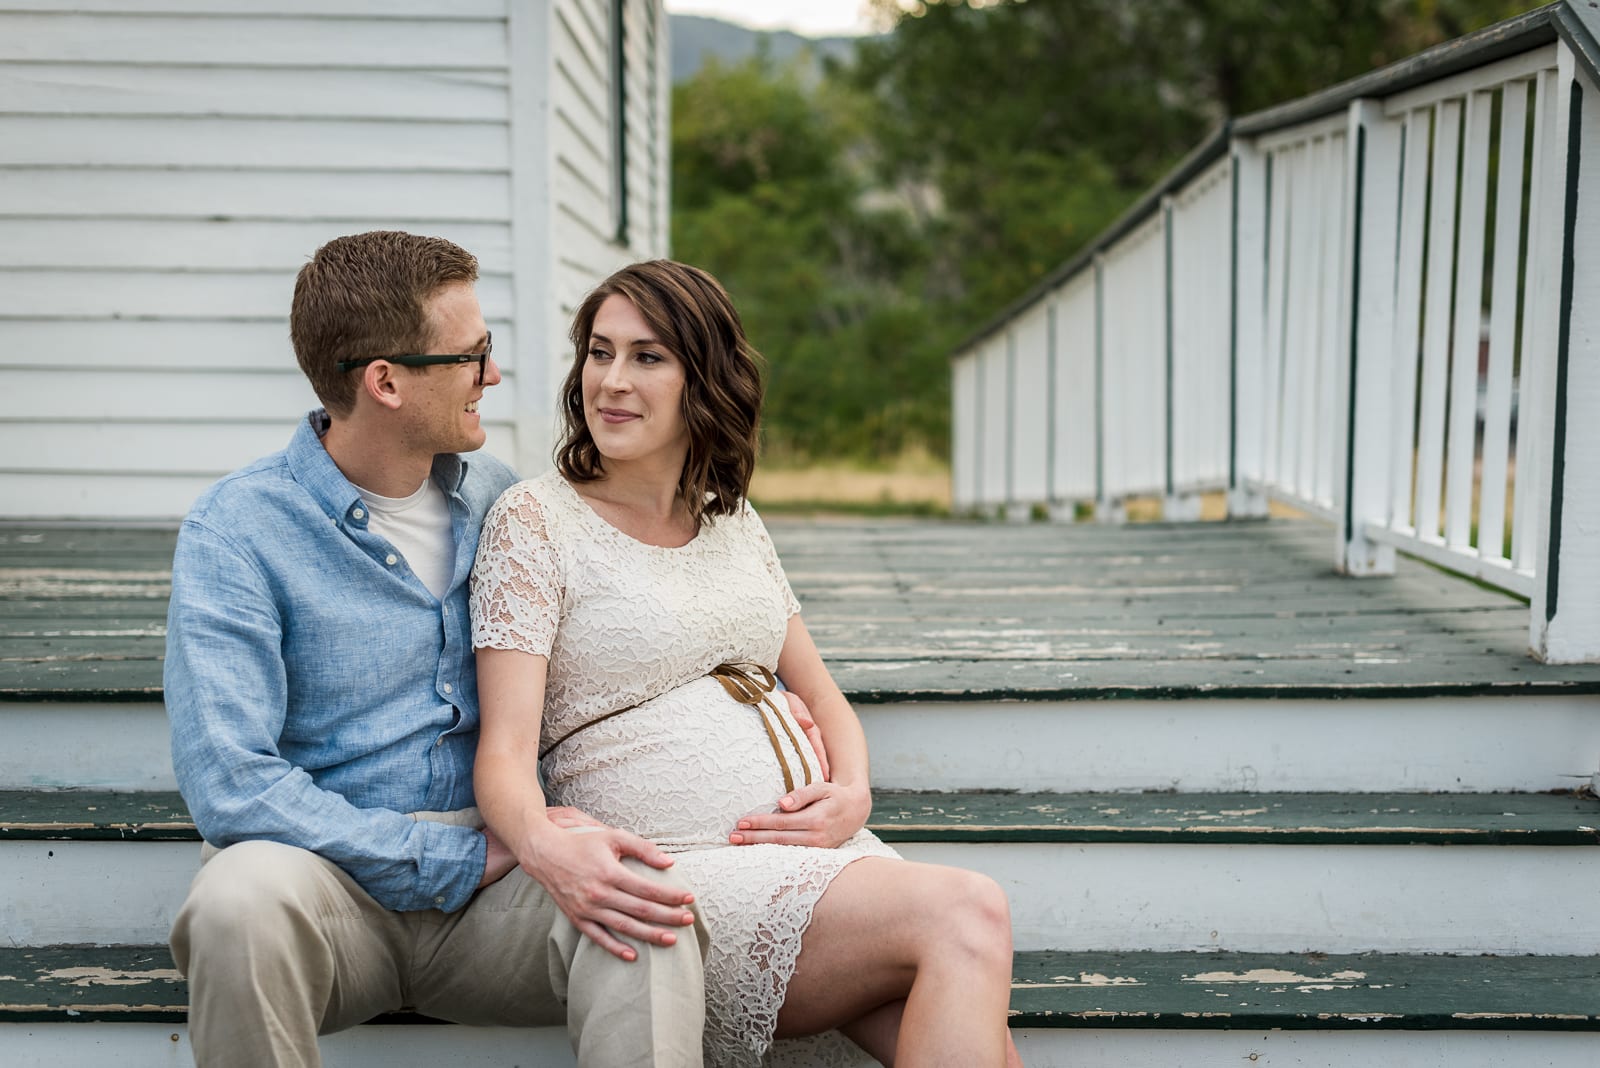 A Golden Maternity Session | Maternity photos | Golden | From the Hip Photo